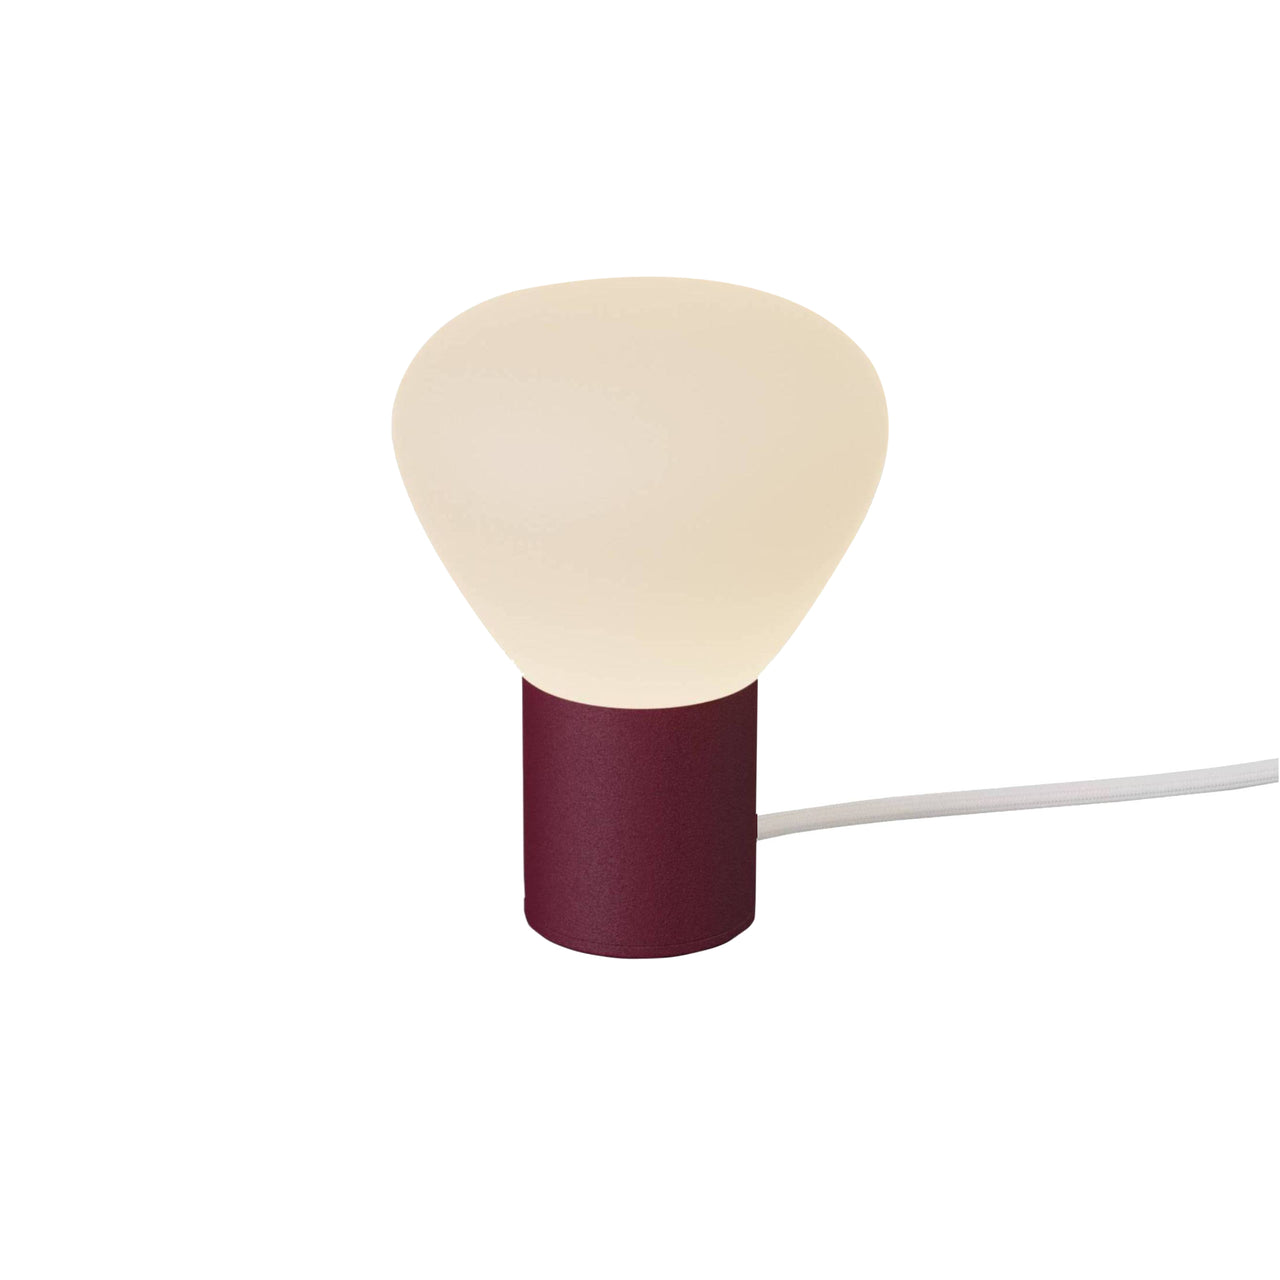 Parc 01 Table Lamp: Footswitch + Burgundy + White